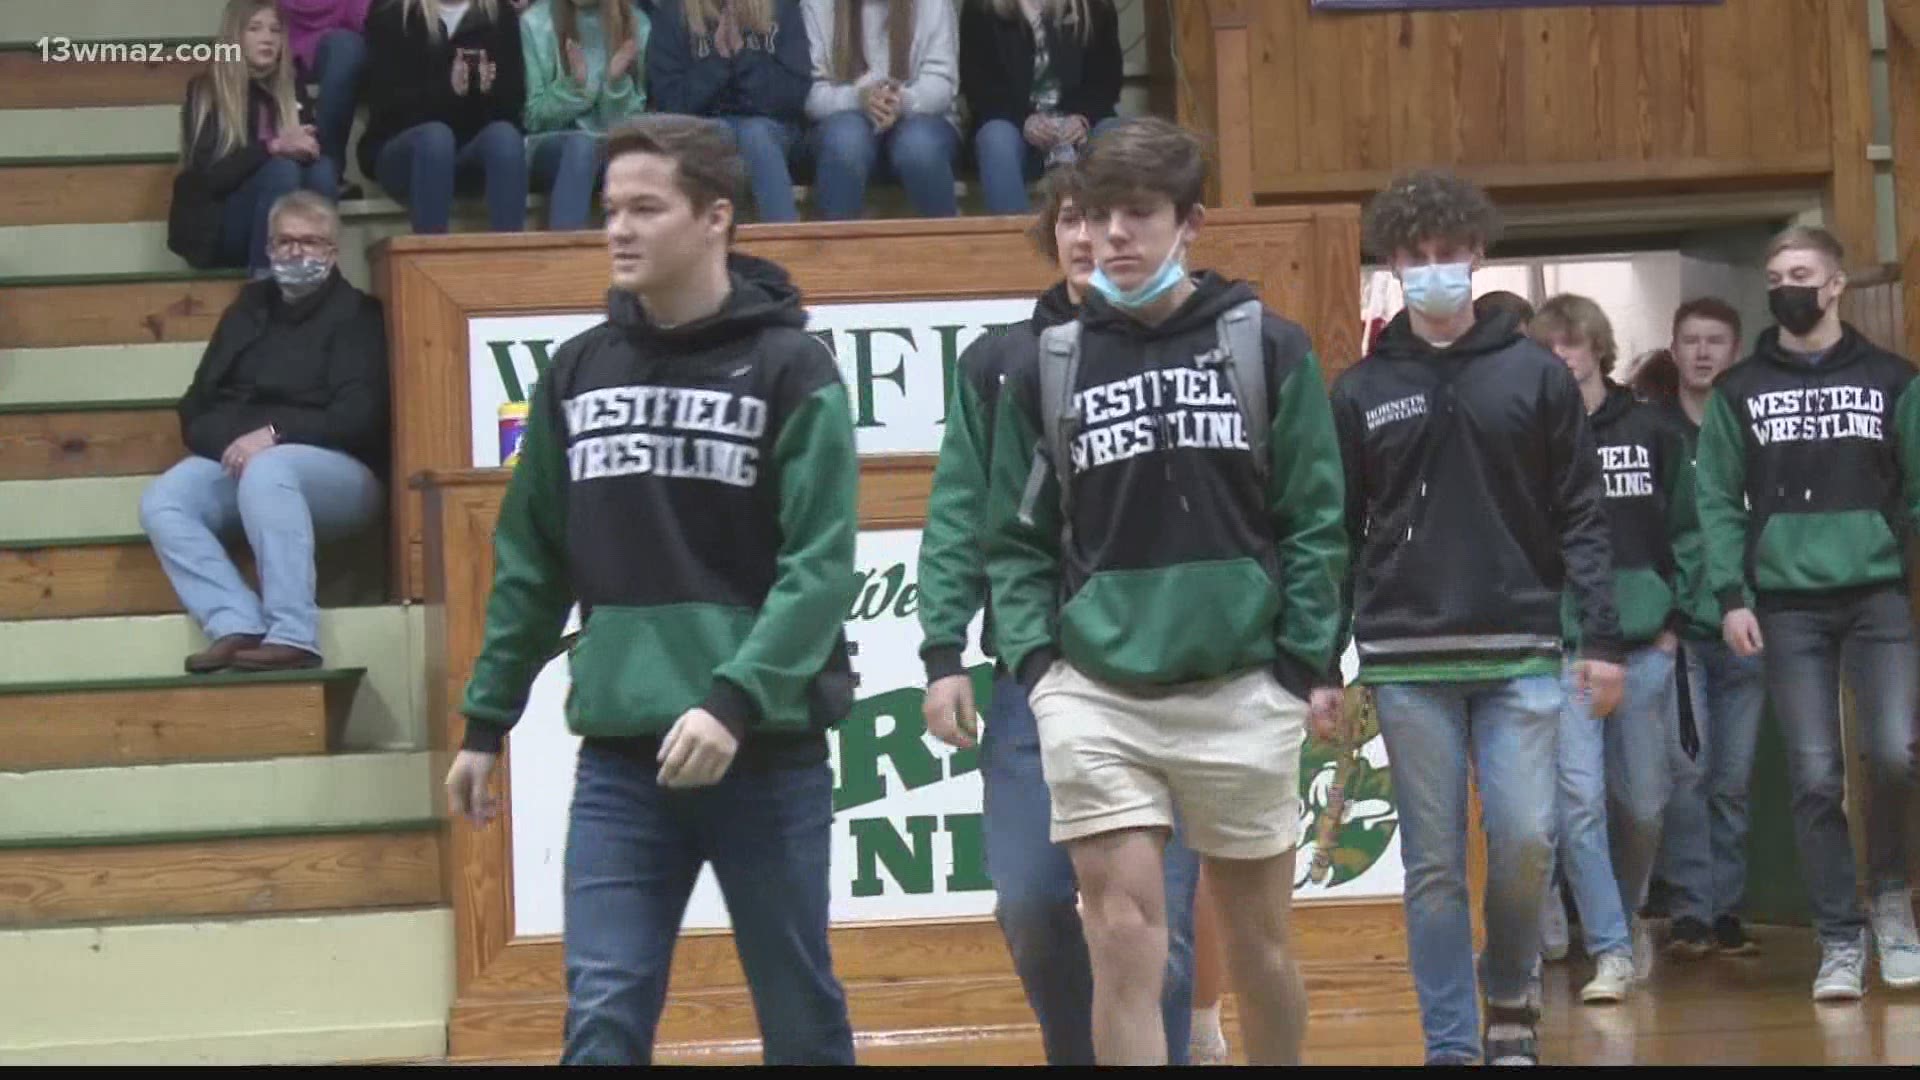 The Westfield Hornets are still making folks Green and Gold with envy after capturing the GISA Wrestling state championship in Americus last weekend